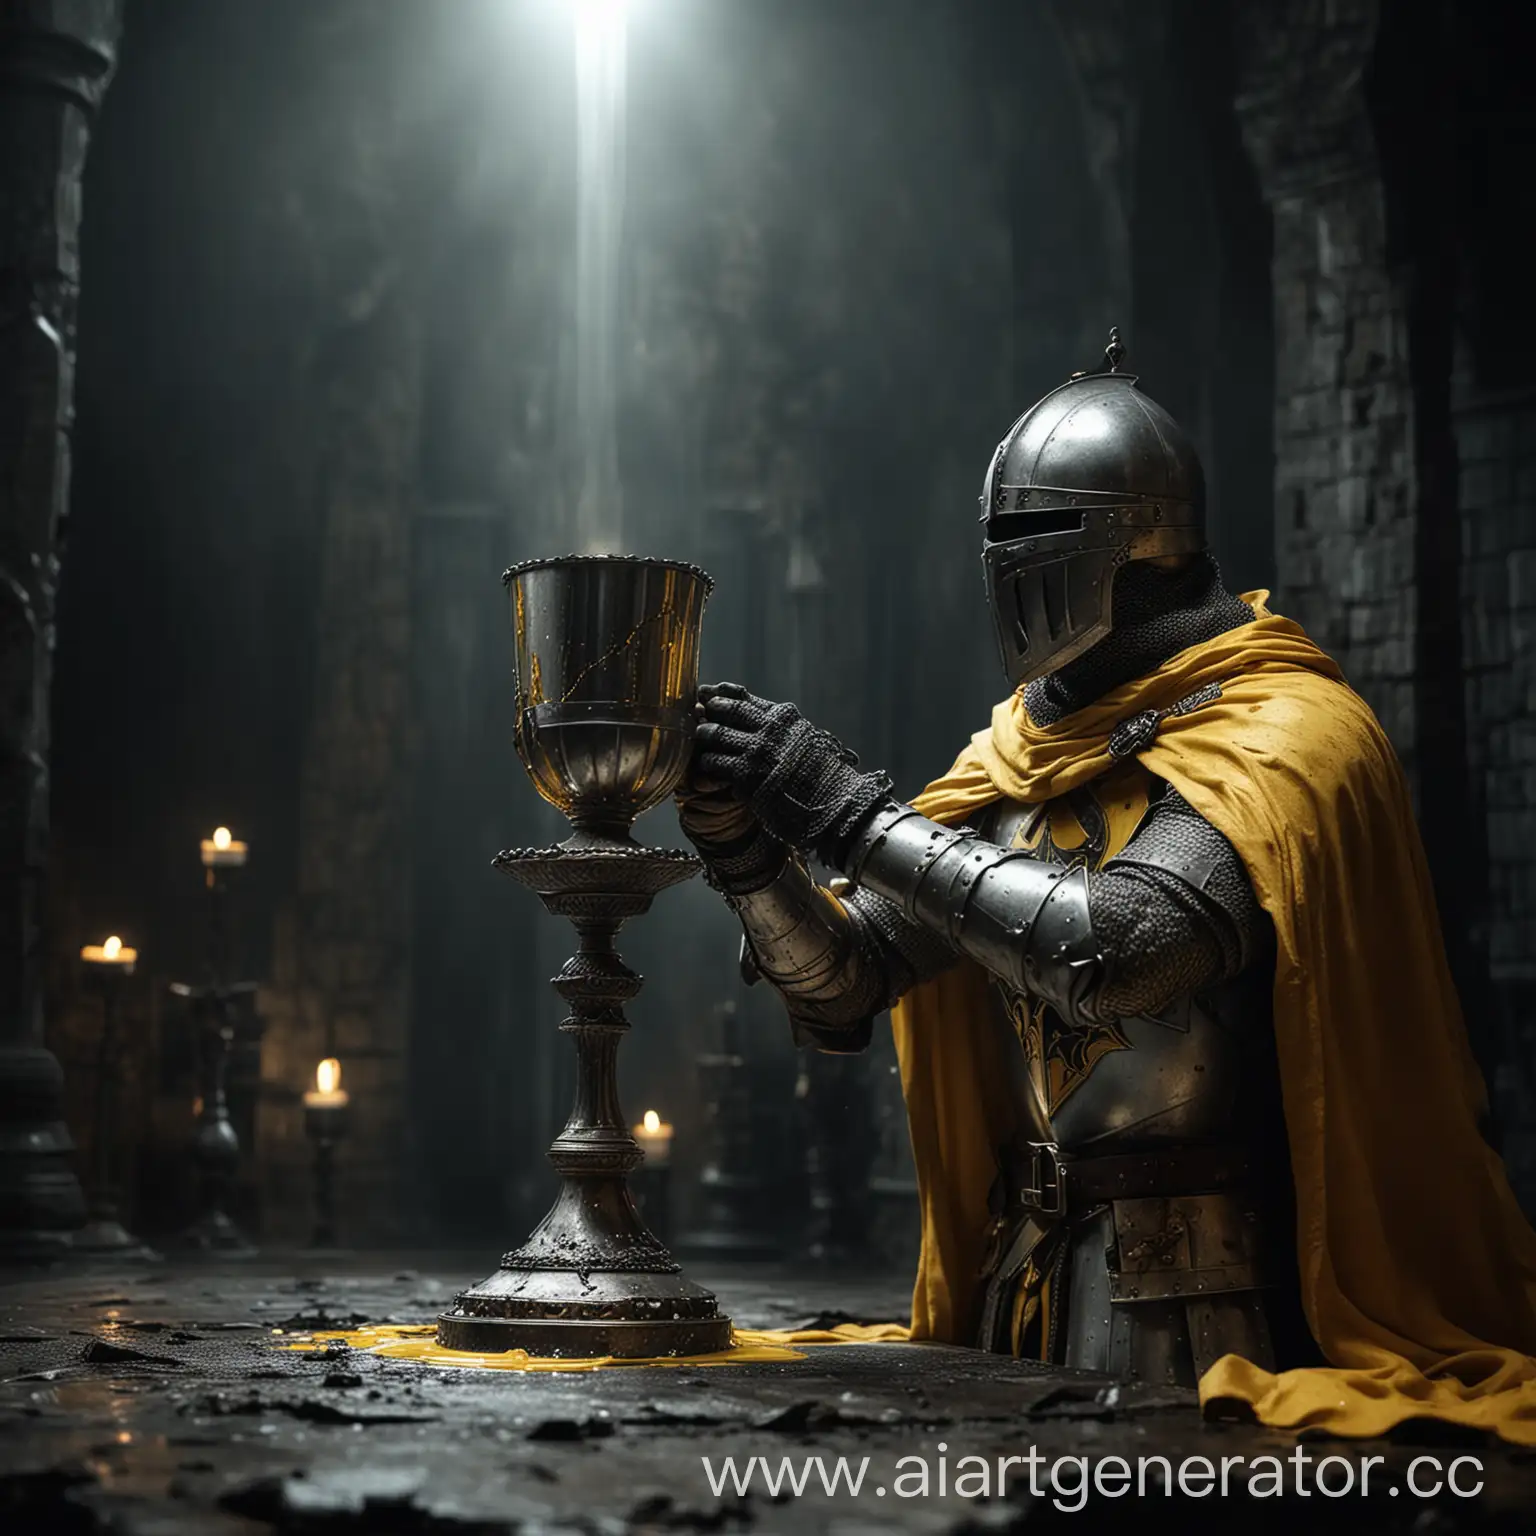 KnightCrusader-Drinking-Sacred-Yellow-Liquid-from-Silver-Chalice-in-Dark-Atmosphere